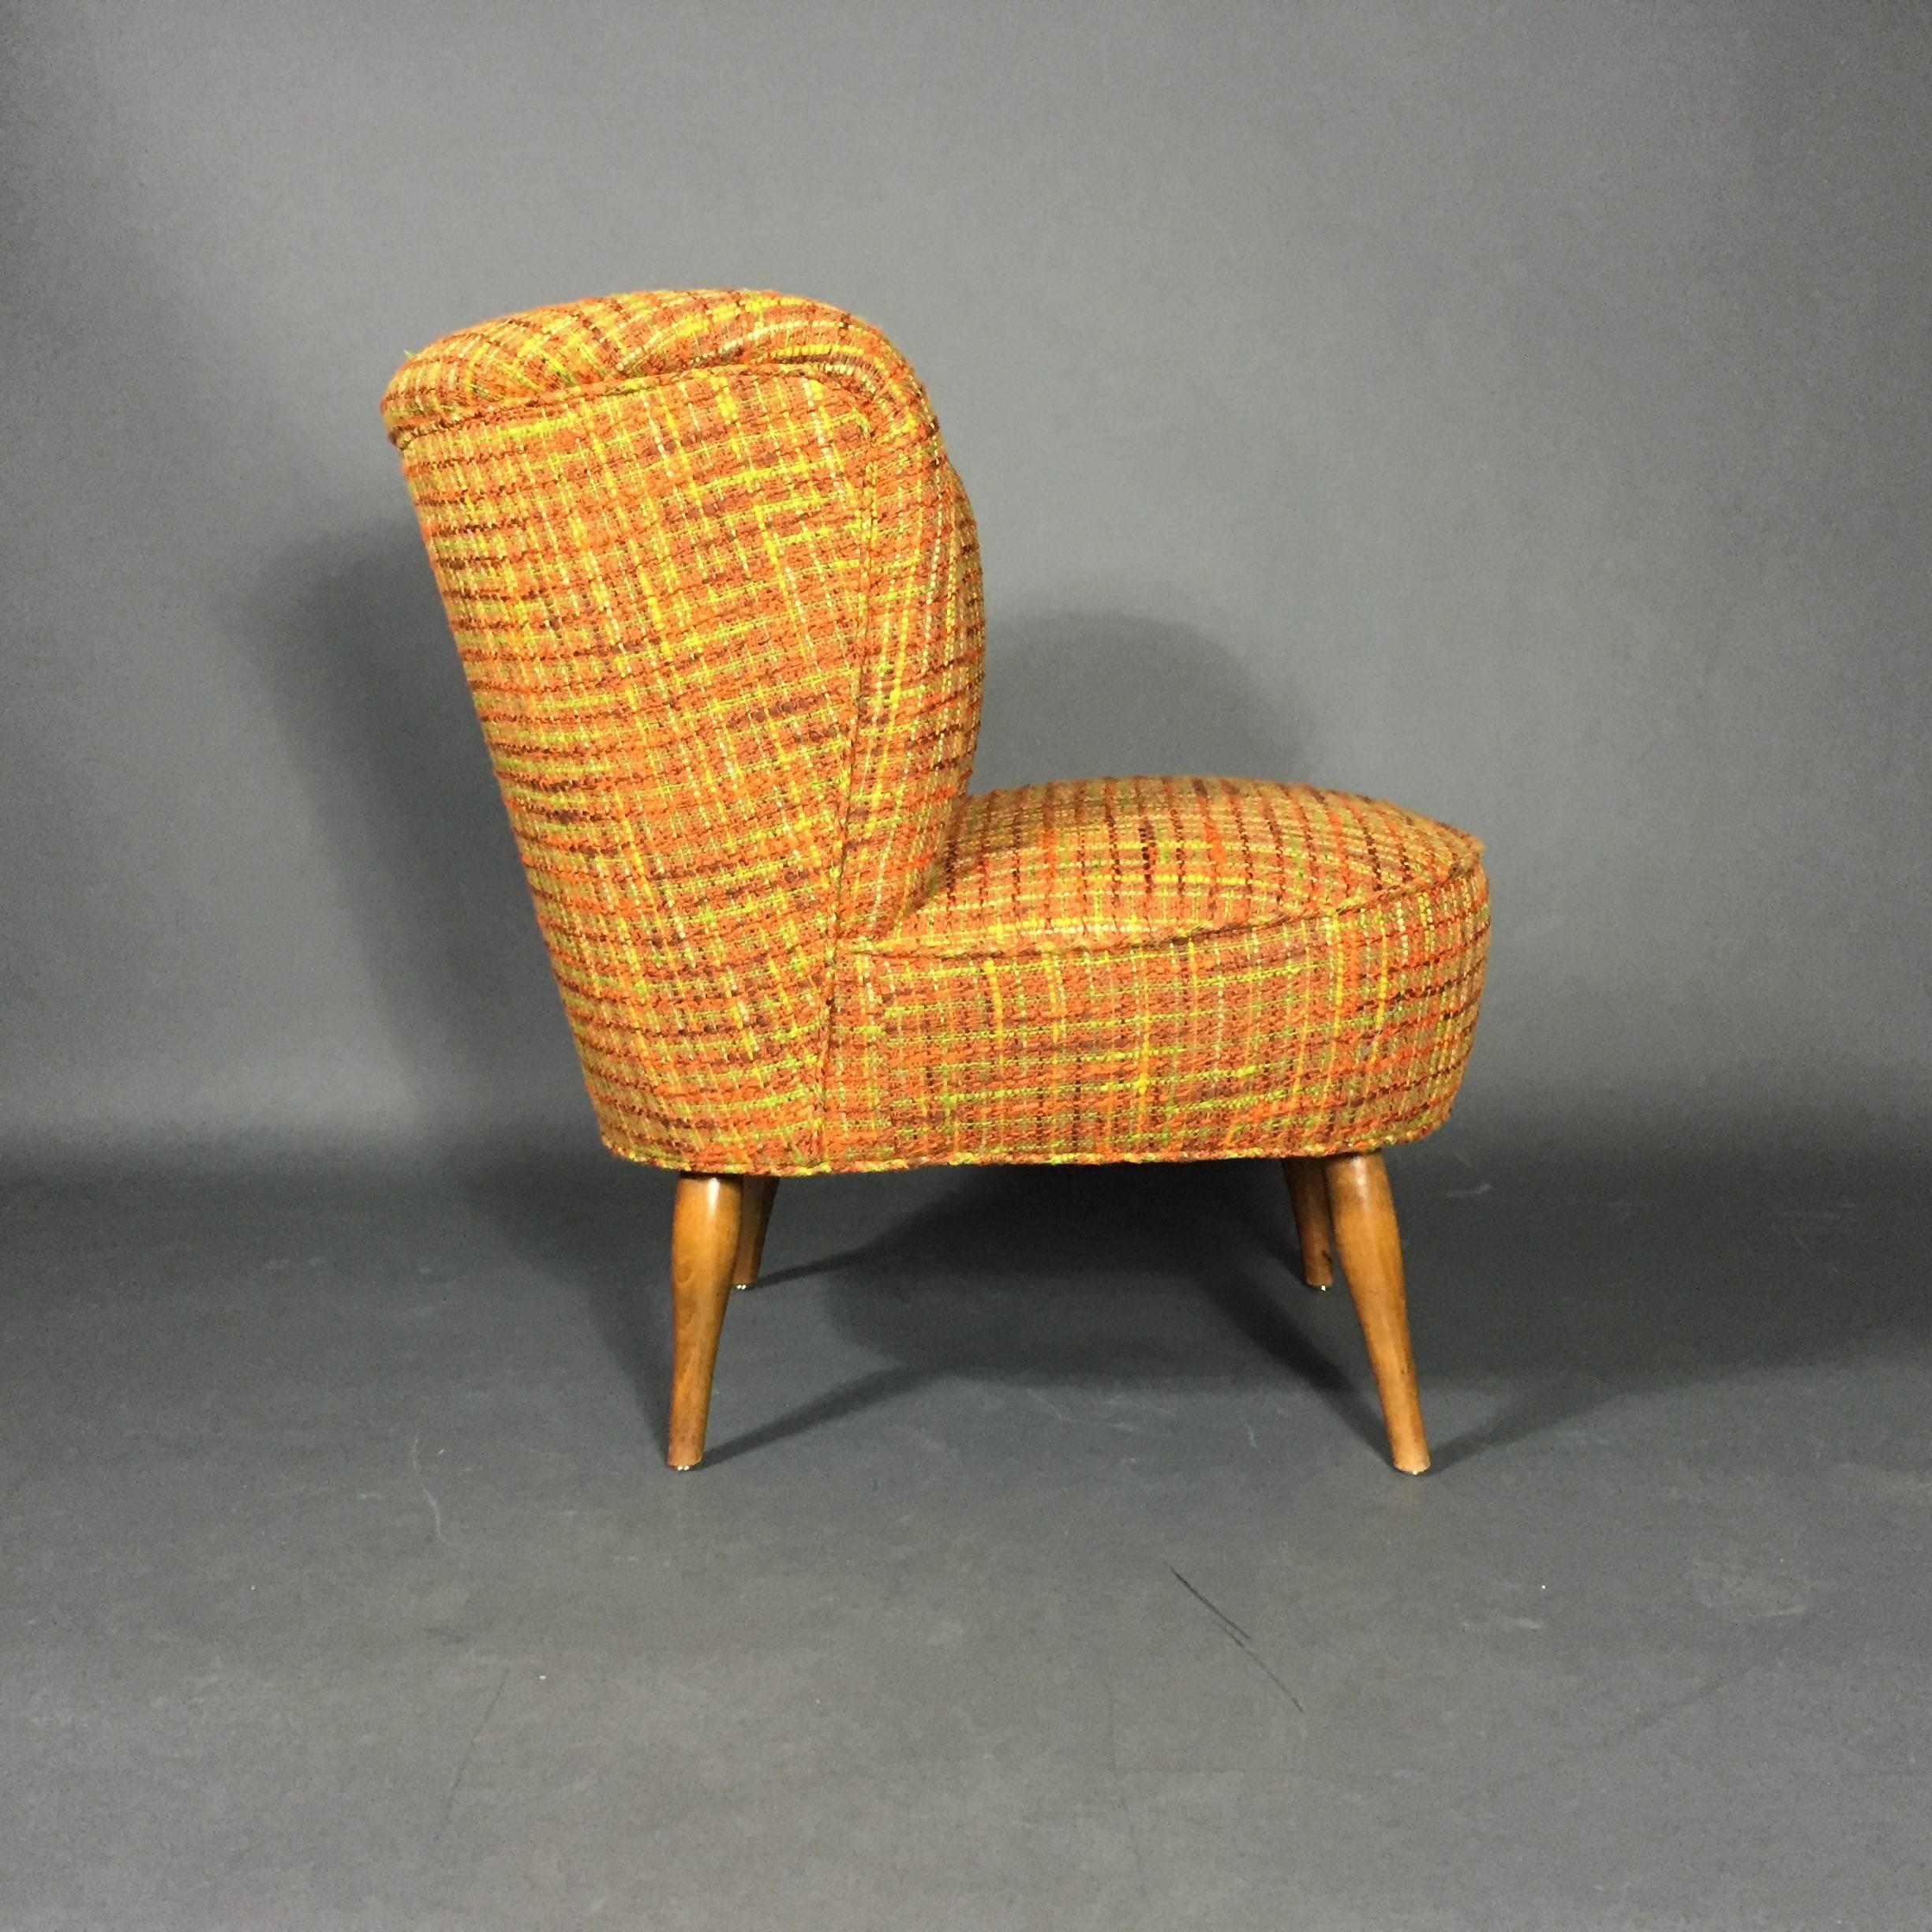 A very sweet lounge chair in the style of Viggo Boesen from the 1950s, likely Danish with a recent upholstery using a wonderful vintage orange bouclé fabric. Perfection.